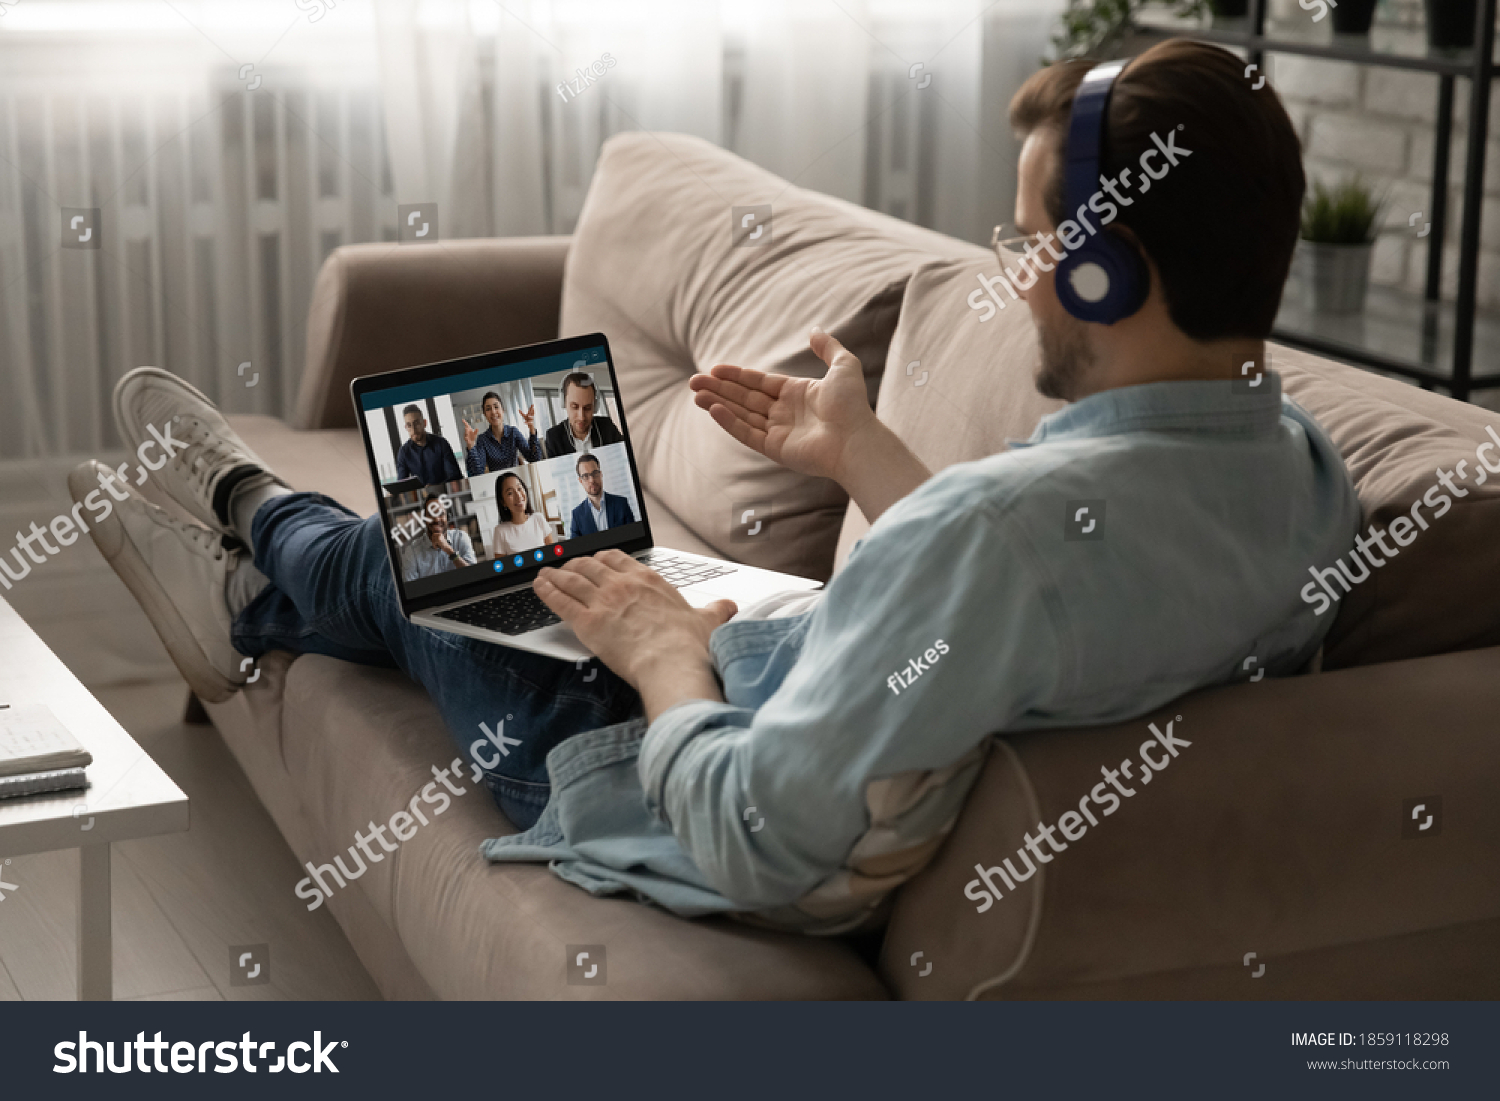 Back rear view young businessman employee in headphones holding video conference online meeting with mixed race colleagues, discussing working issues remotely from home, lying on comfortable sofa. #1859118298